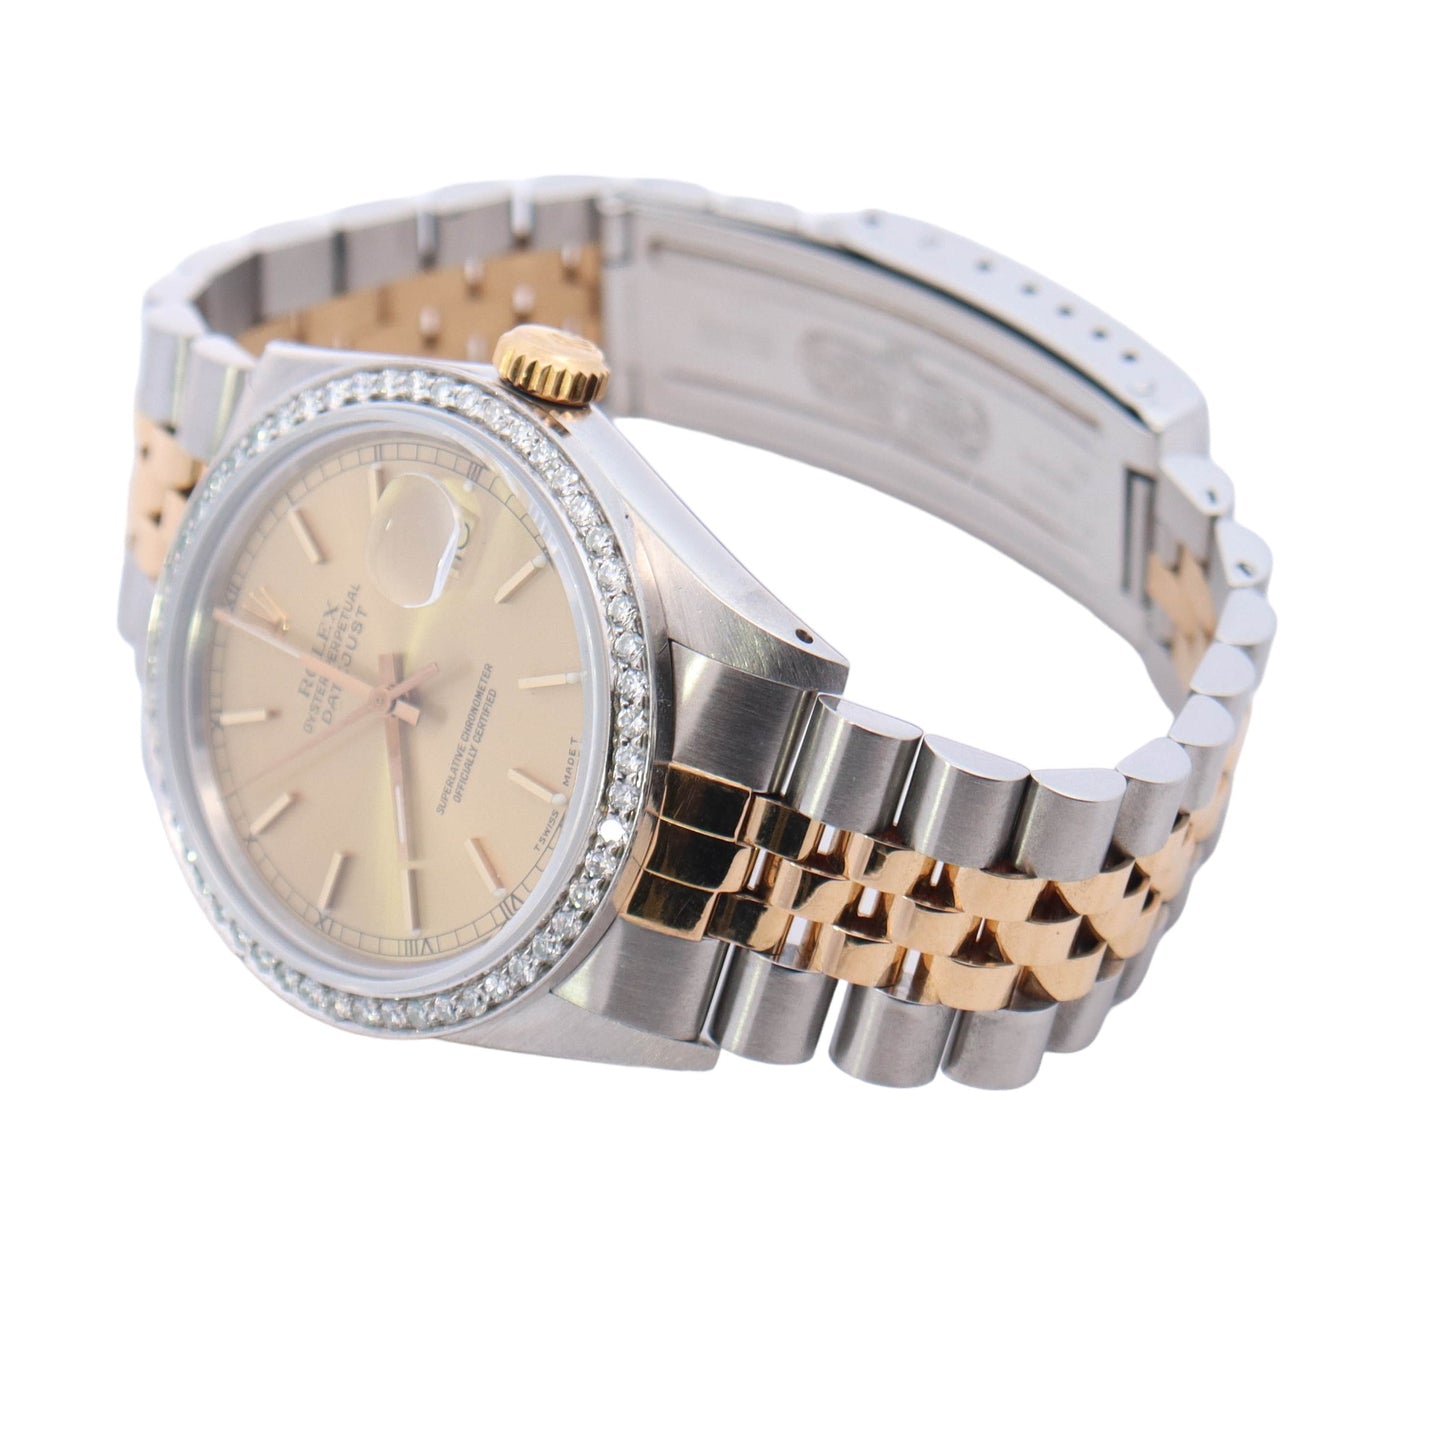 Rolex Datejust Two Tone Steel & Yellow Gold Champagne Stick Dial Watch Reference #: 16013